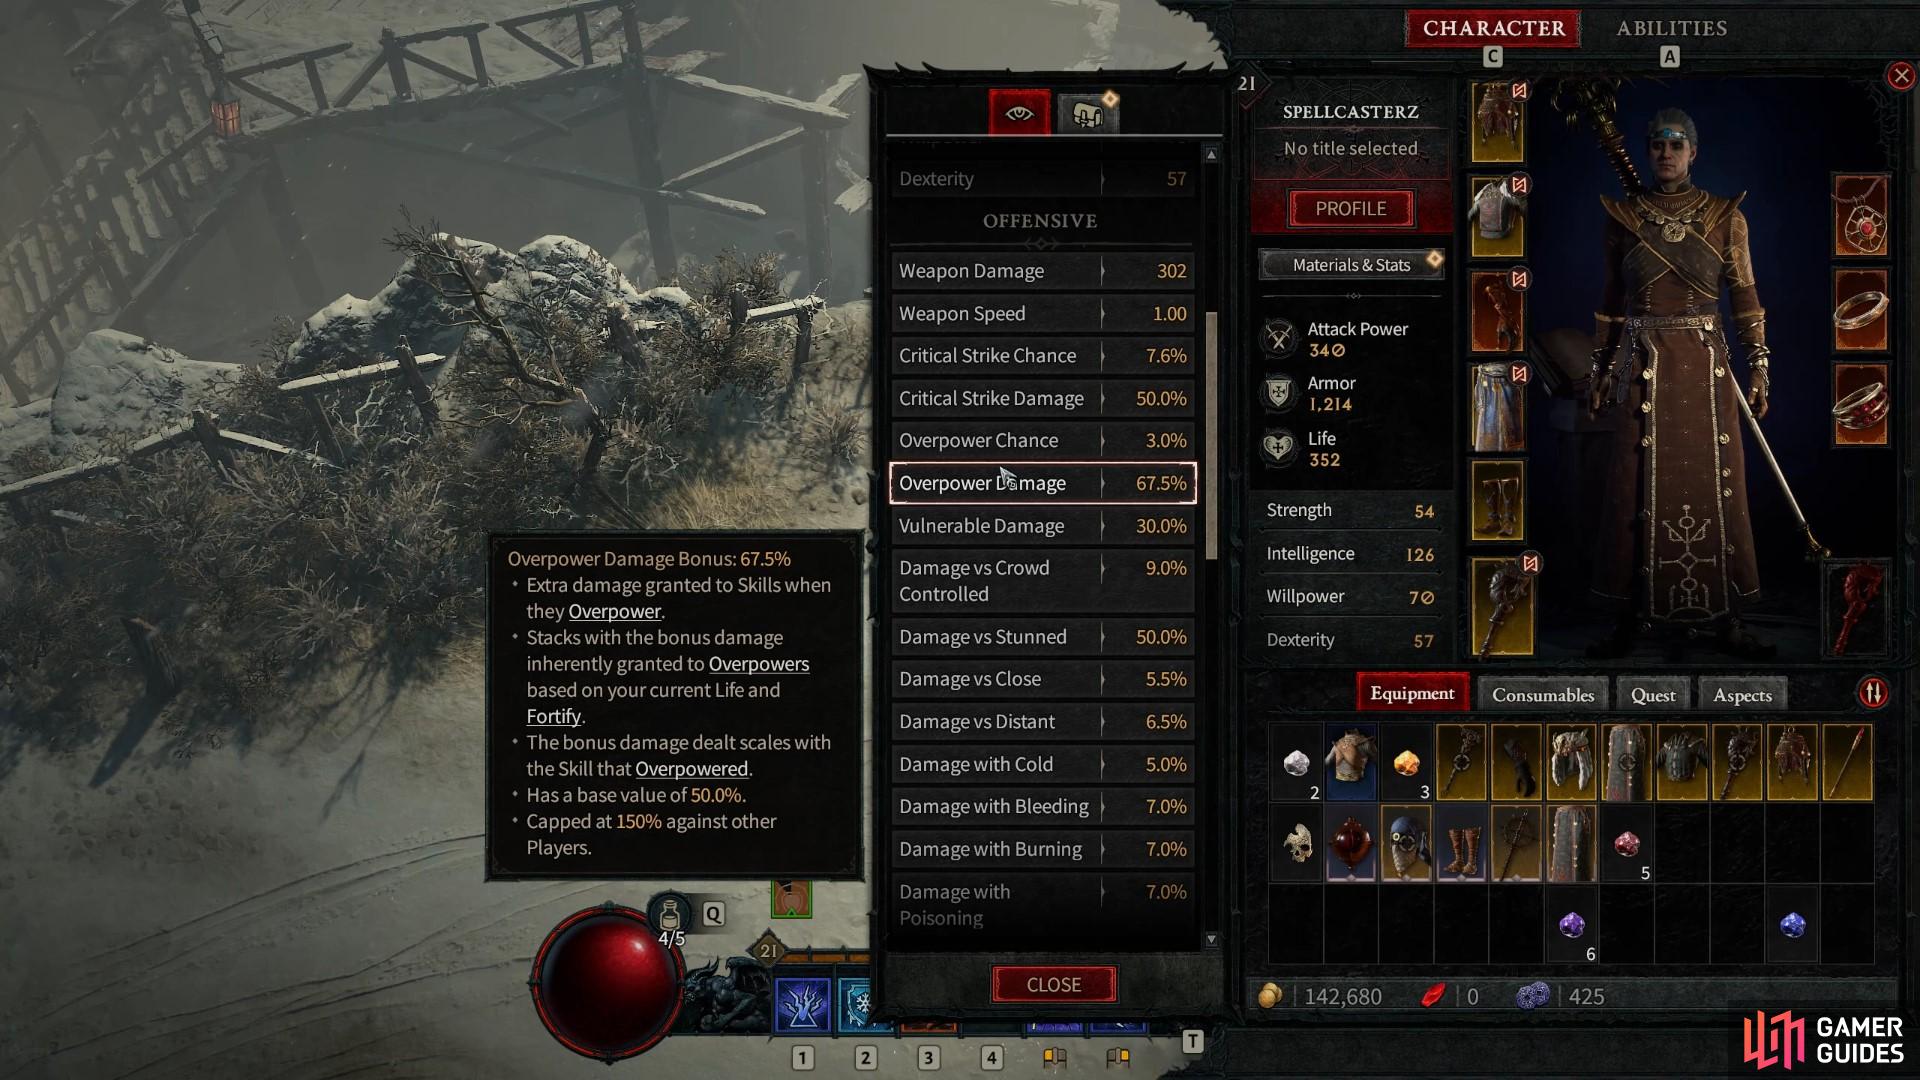 You can look at how your Overpower damage scalings by entering the character stats screen, as shown here.